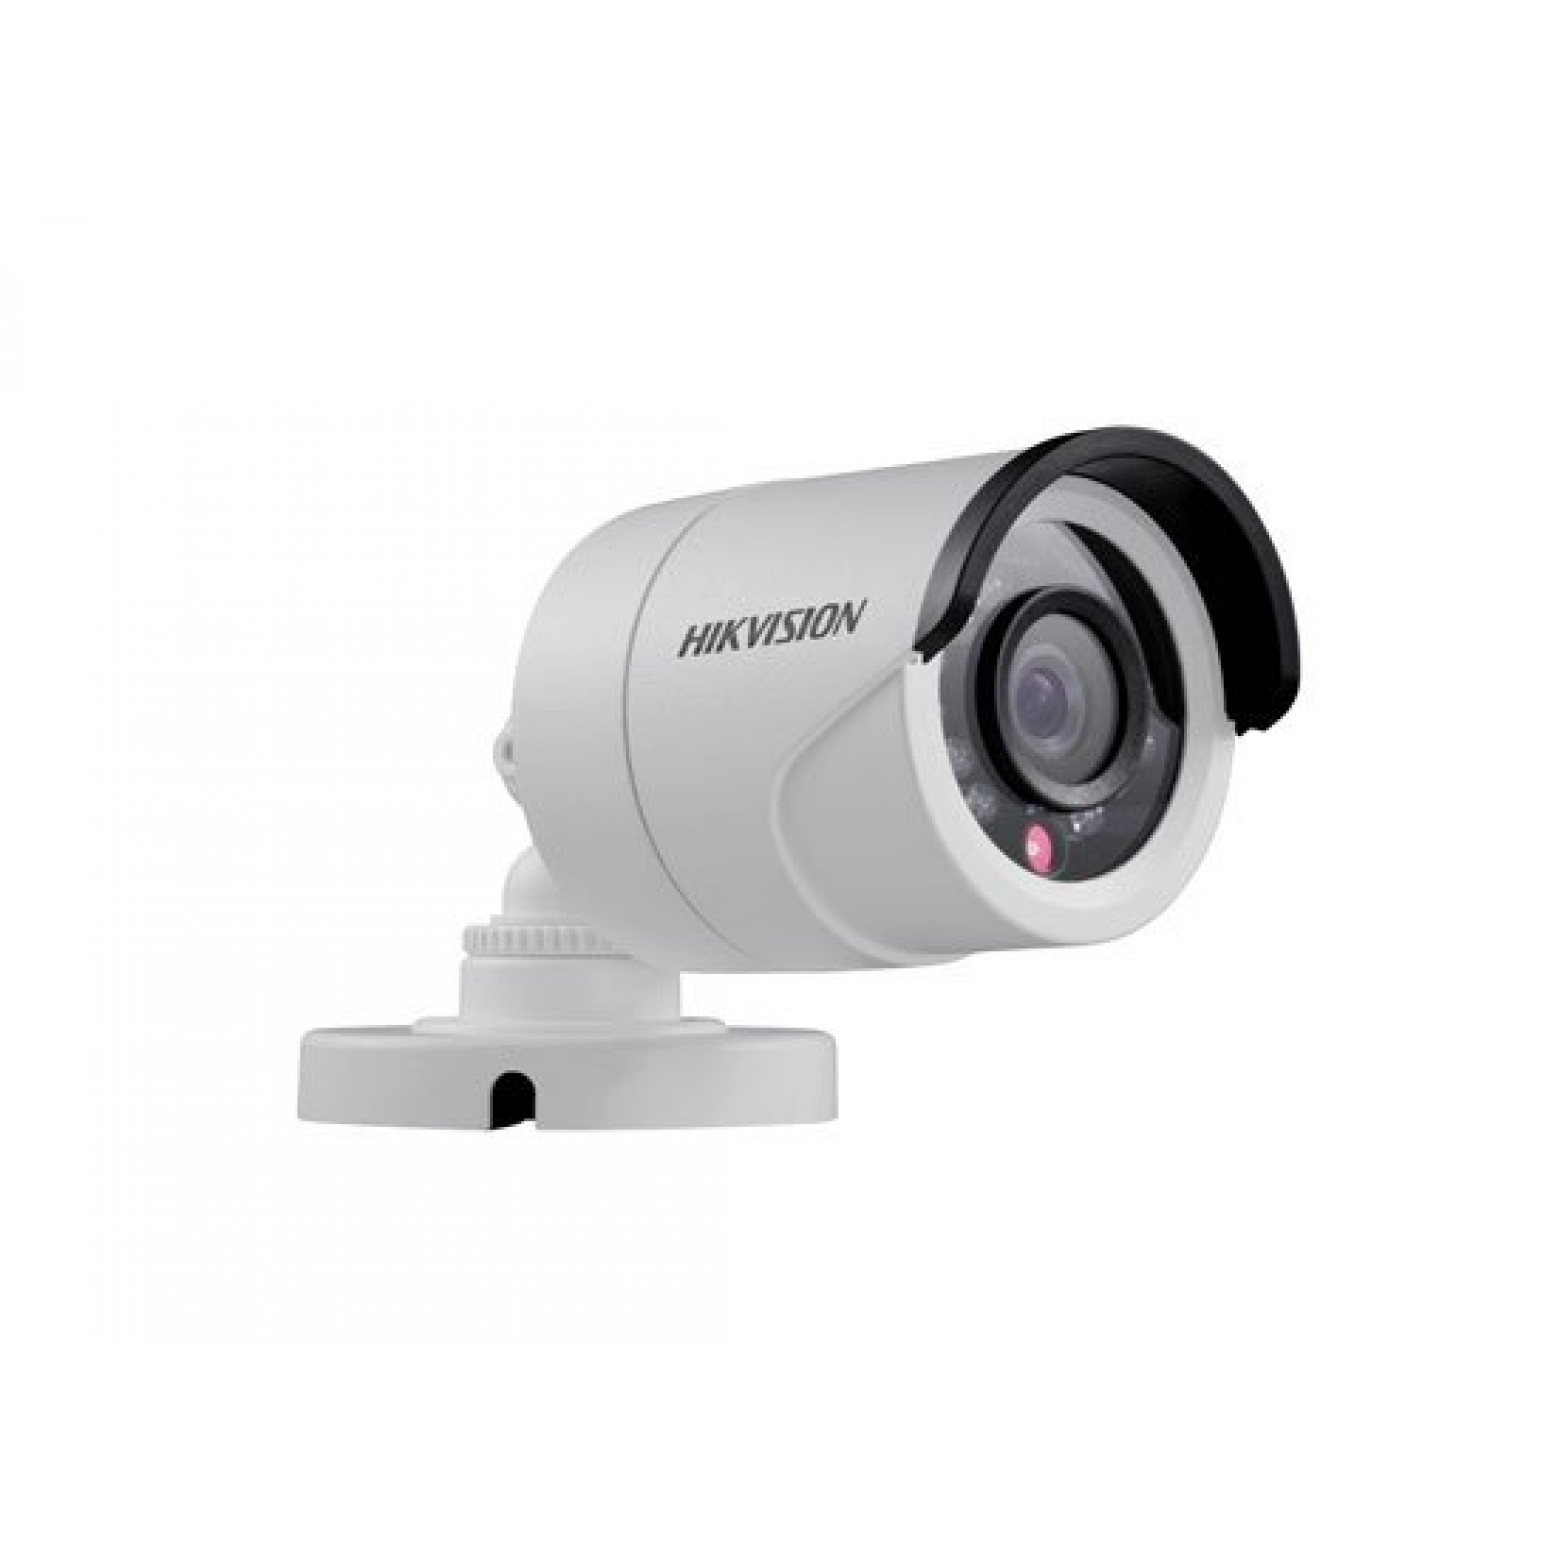 Hikvision DS-2CE16C2T-IR Turbo HD Bullet Camera